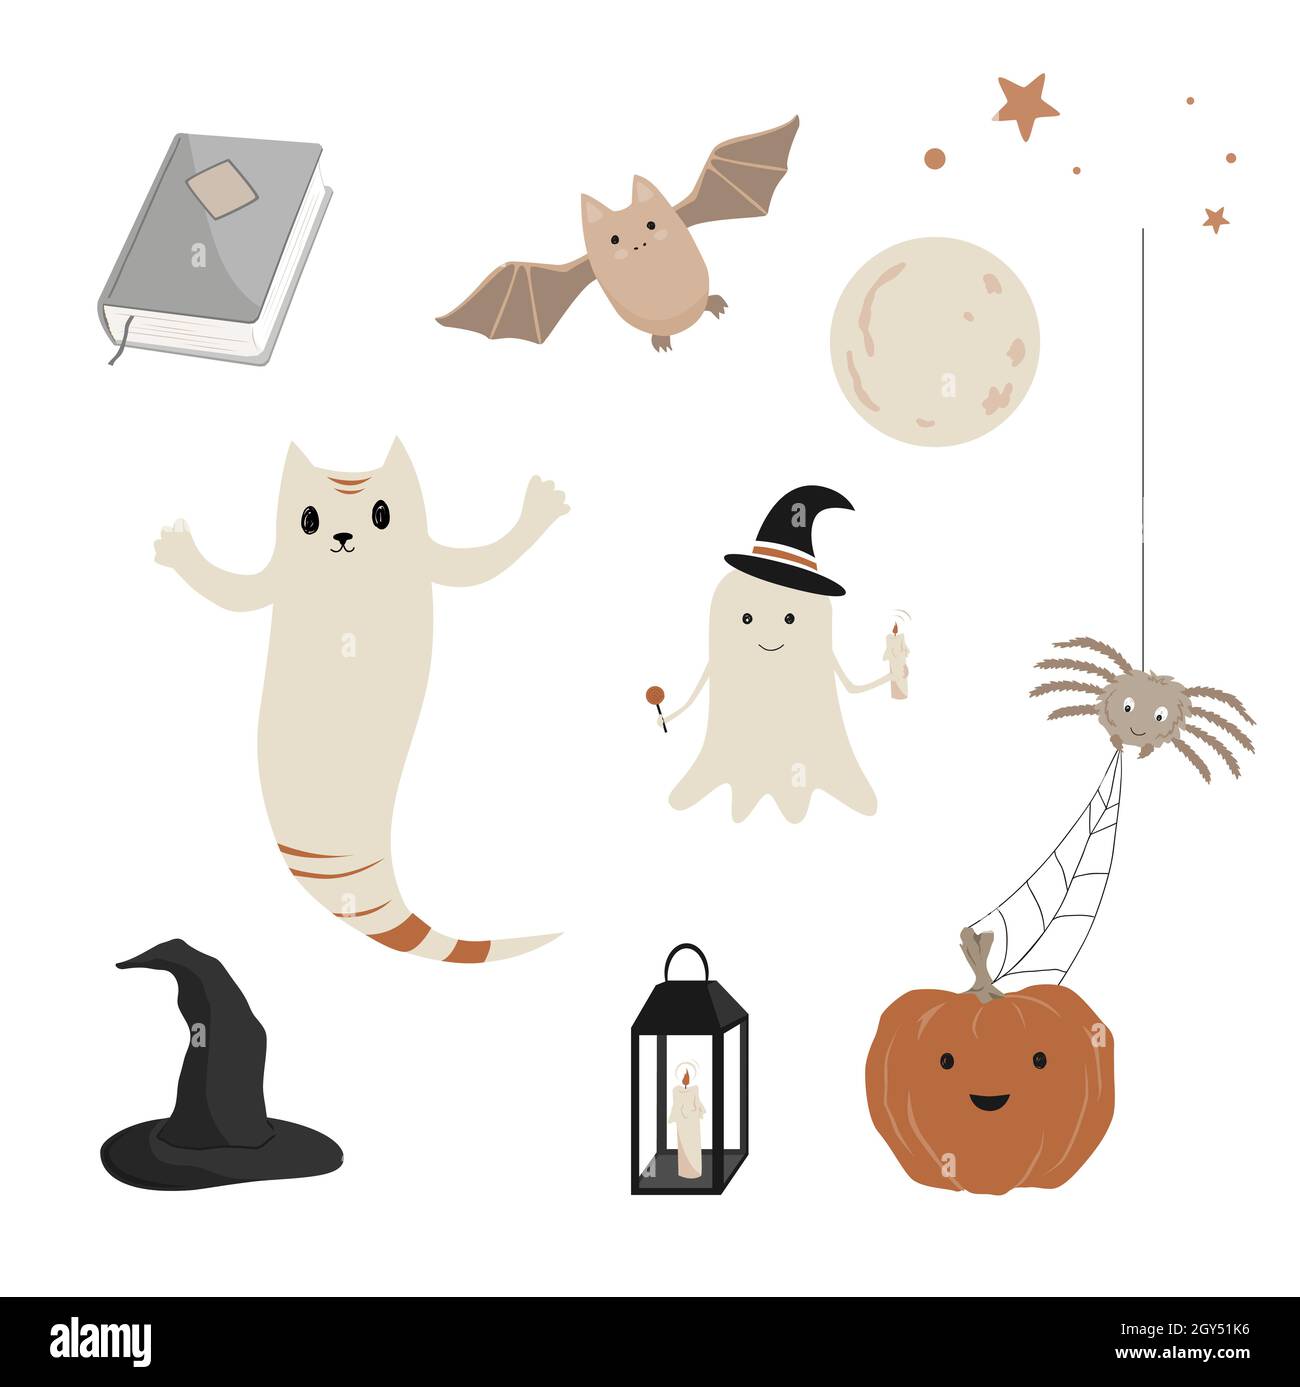 Halloween icons set. Cute ghosts, magic book, witch hat, full moon, and crazy pumpkin with a spider. Halloween characters collection in nursery style Stock Vector